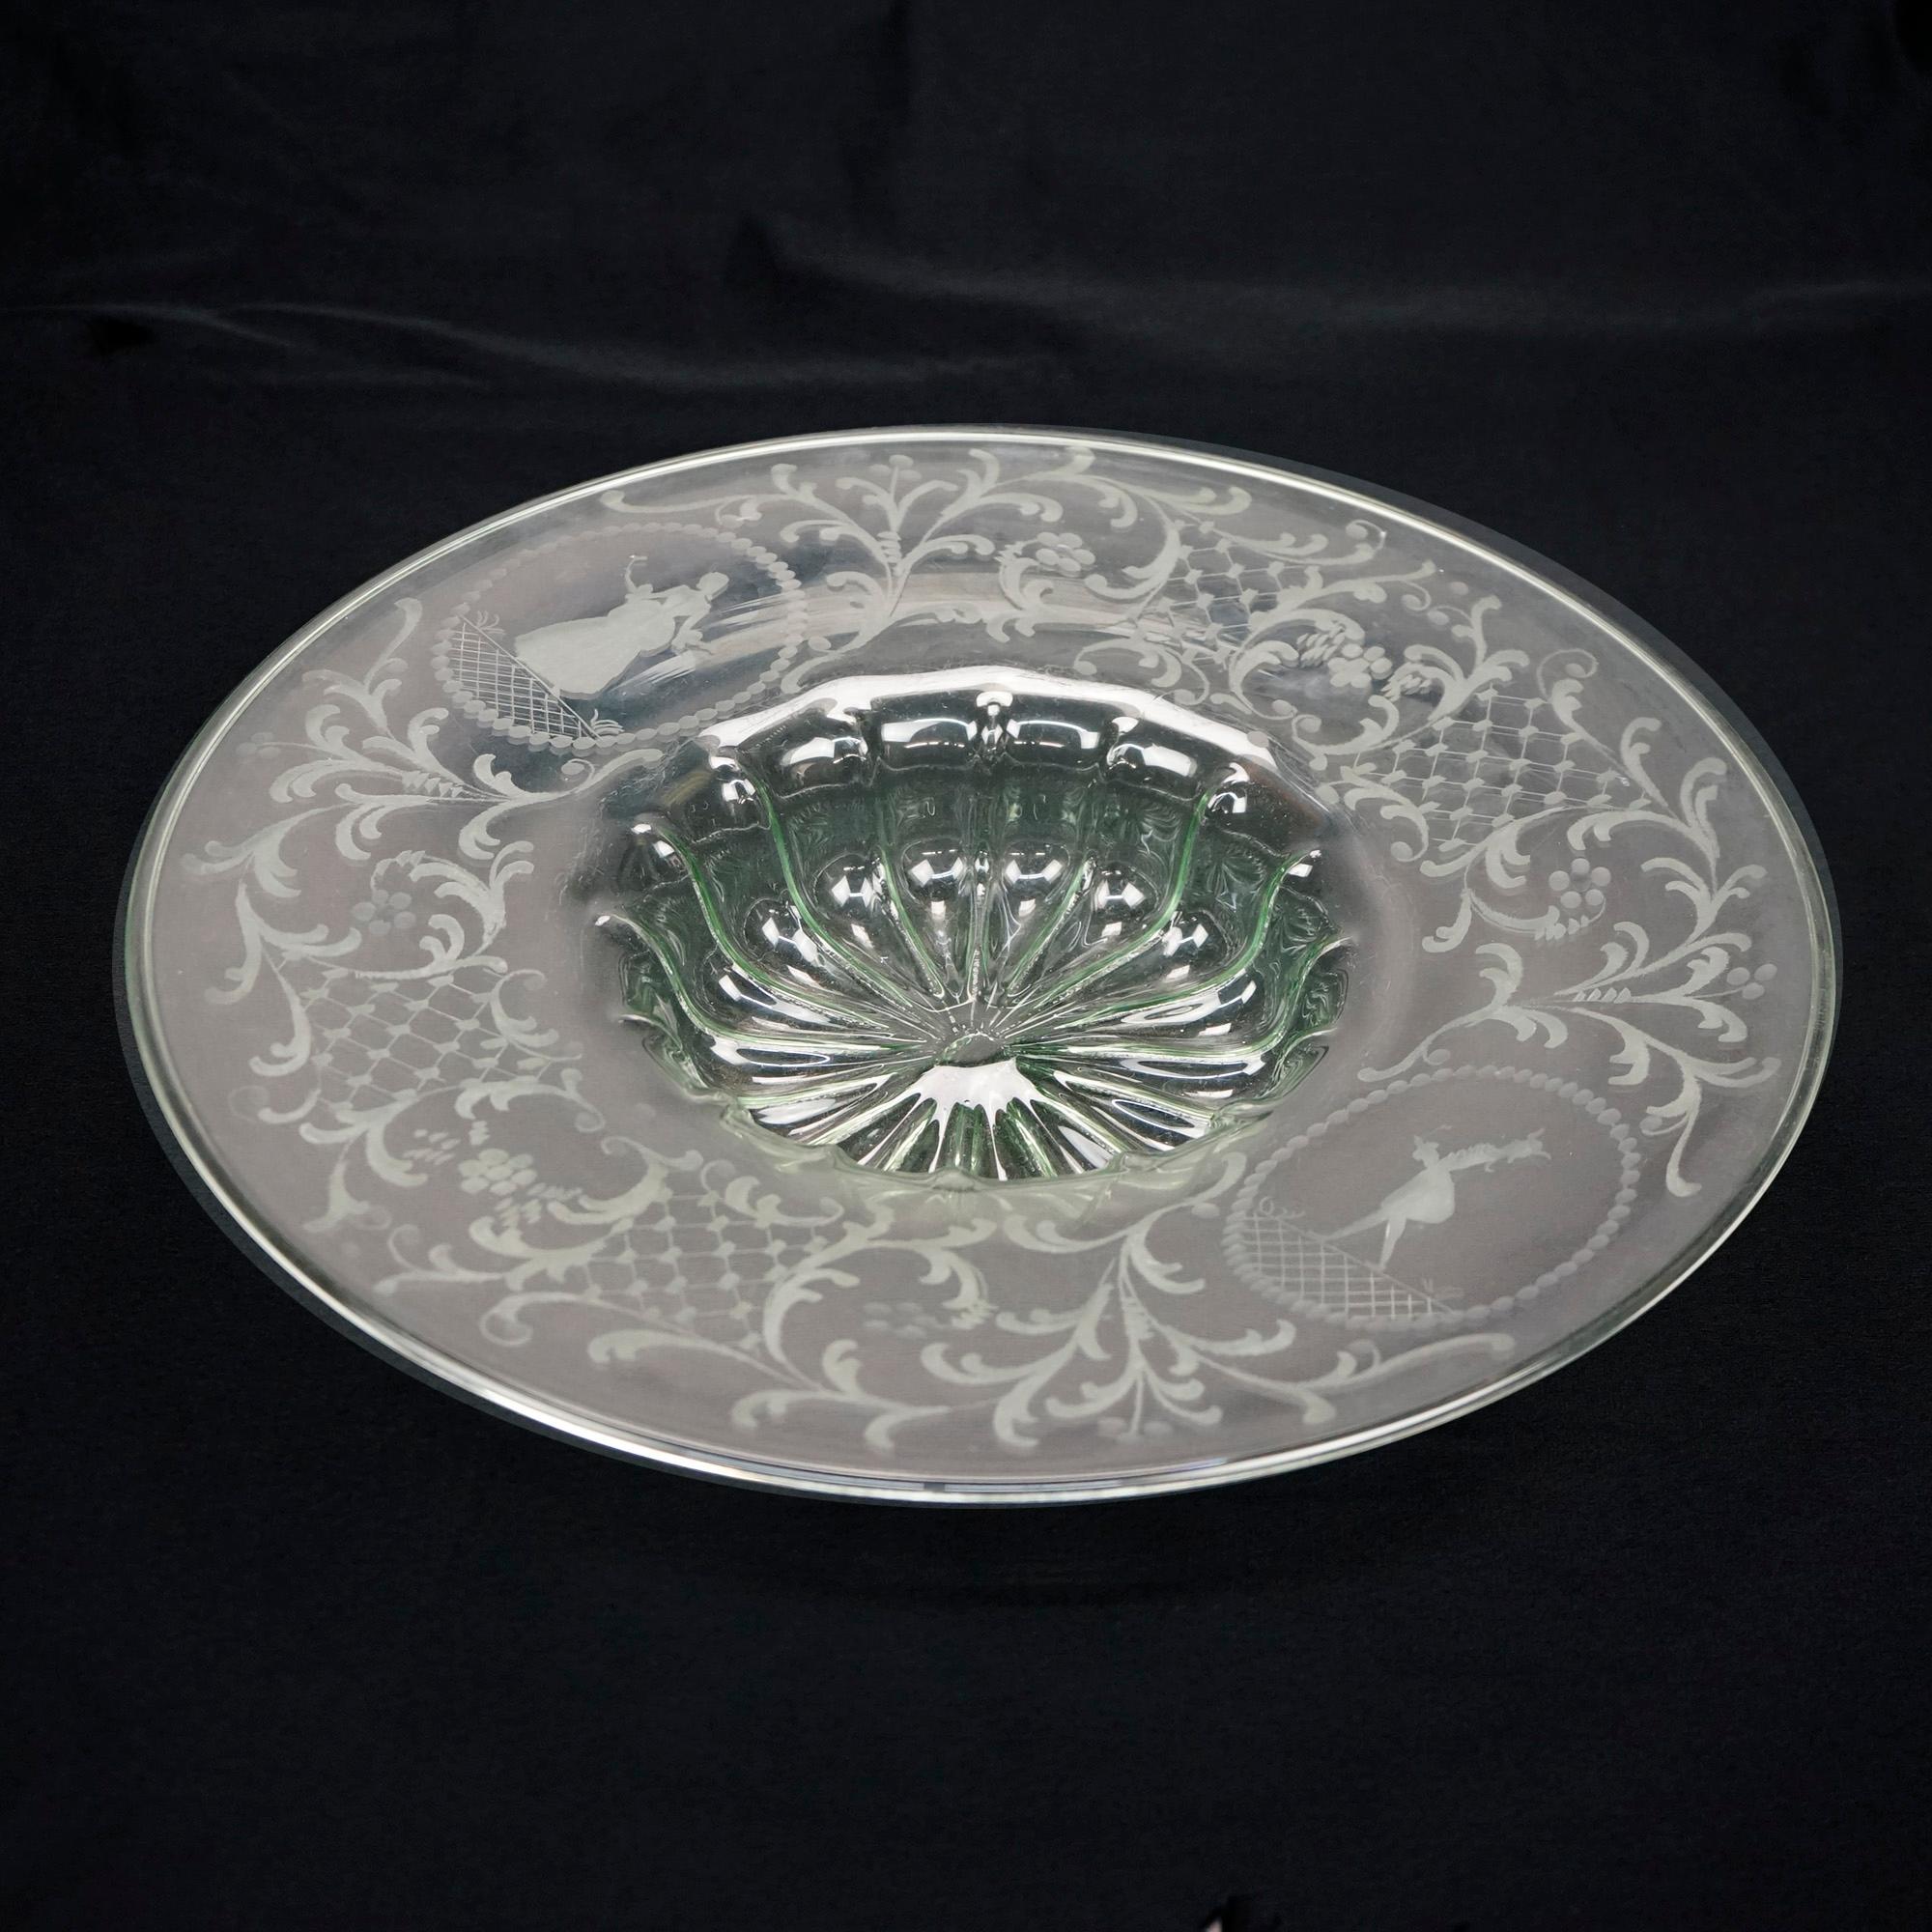 An antique Elegant Glass center bowl offer wide rim with flanking etched female cameos with foliate and scroll decoration throughout, glass with slight green tint, c1920

Measures- 3''H x 17.5''W x 17.5''D

Catalogue Note: Ask about DISCOUNTED